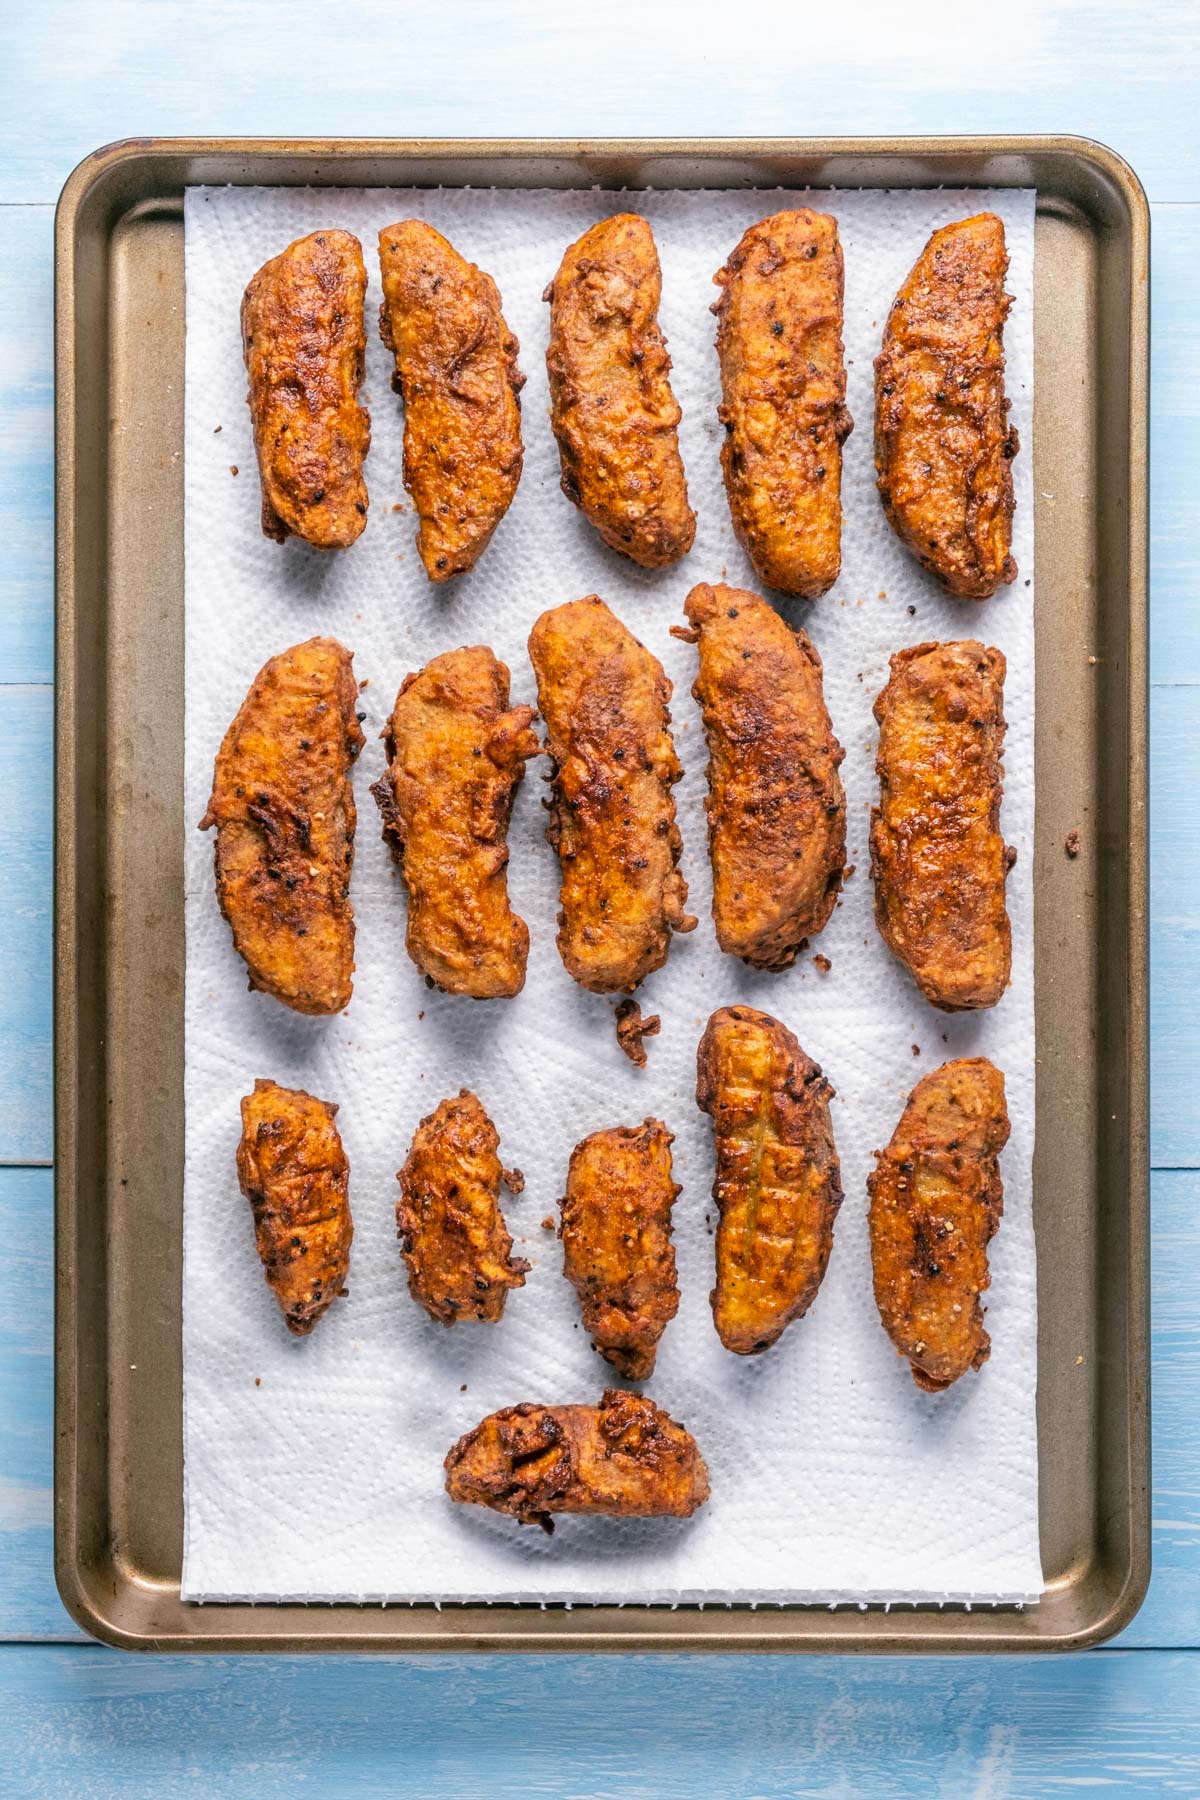 Vegan fried chicken pieces on a baking sheet lined with paper towels.